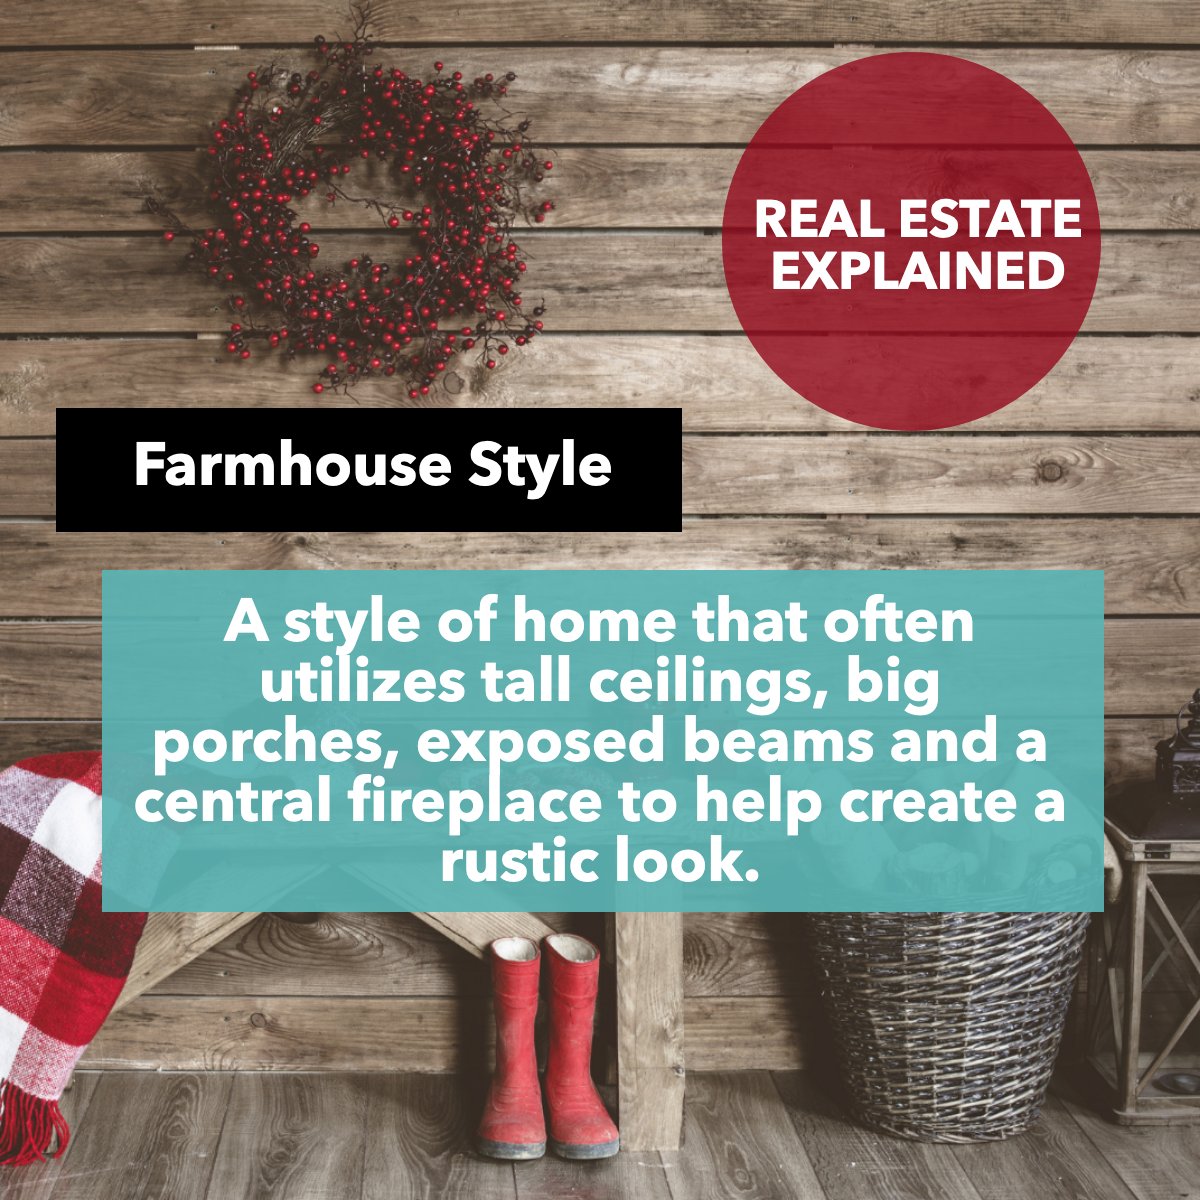 Did you know 🤔 what a Farmhouse Style is 🏡

Is this the type of house that you like

#farmhousestylehome #farmhousestyledesign #farmhousestyleinspired #farmhouseismystyle
#social